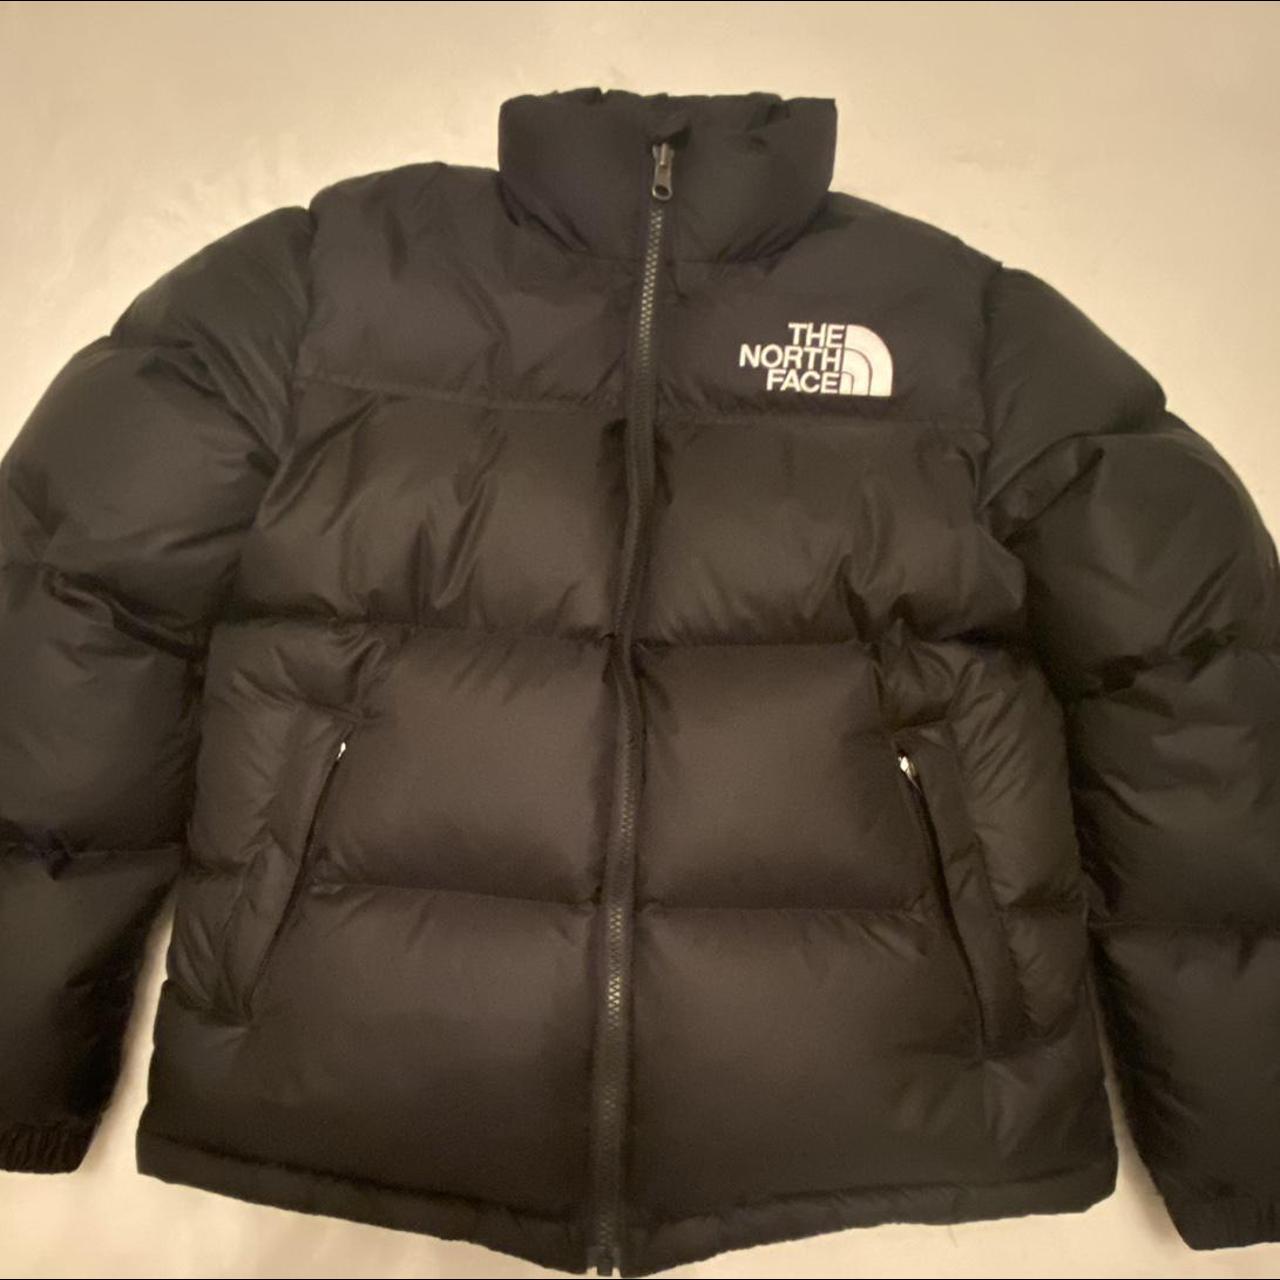 Black North Face Puffer Jacket, In size... - Depop